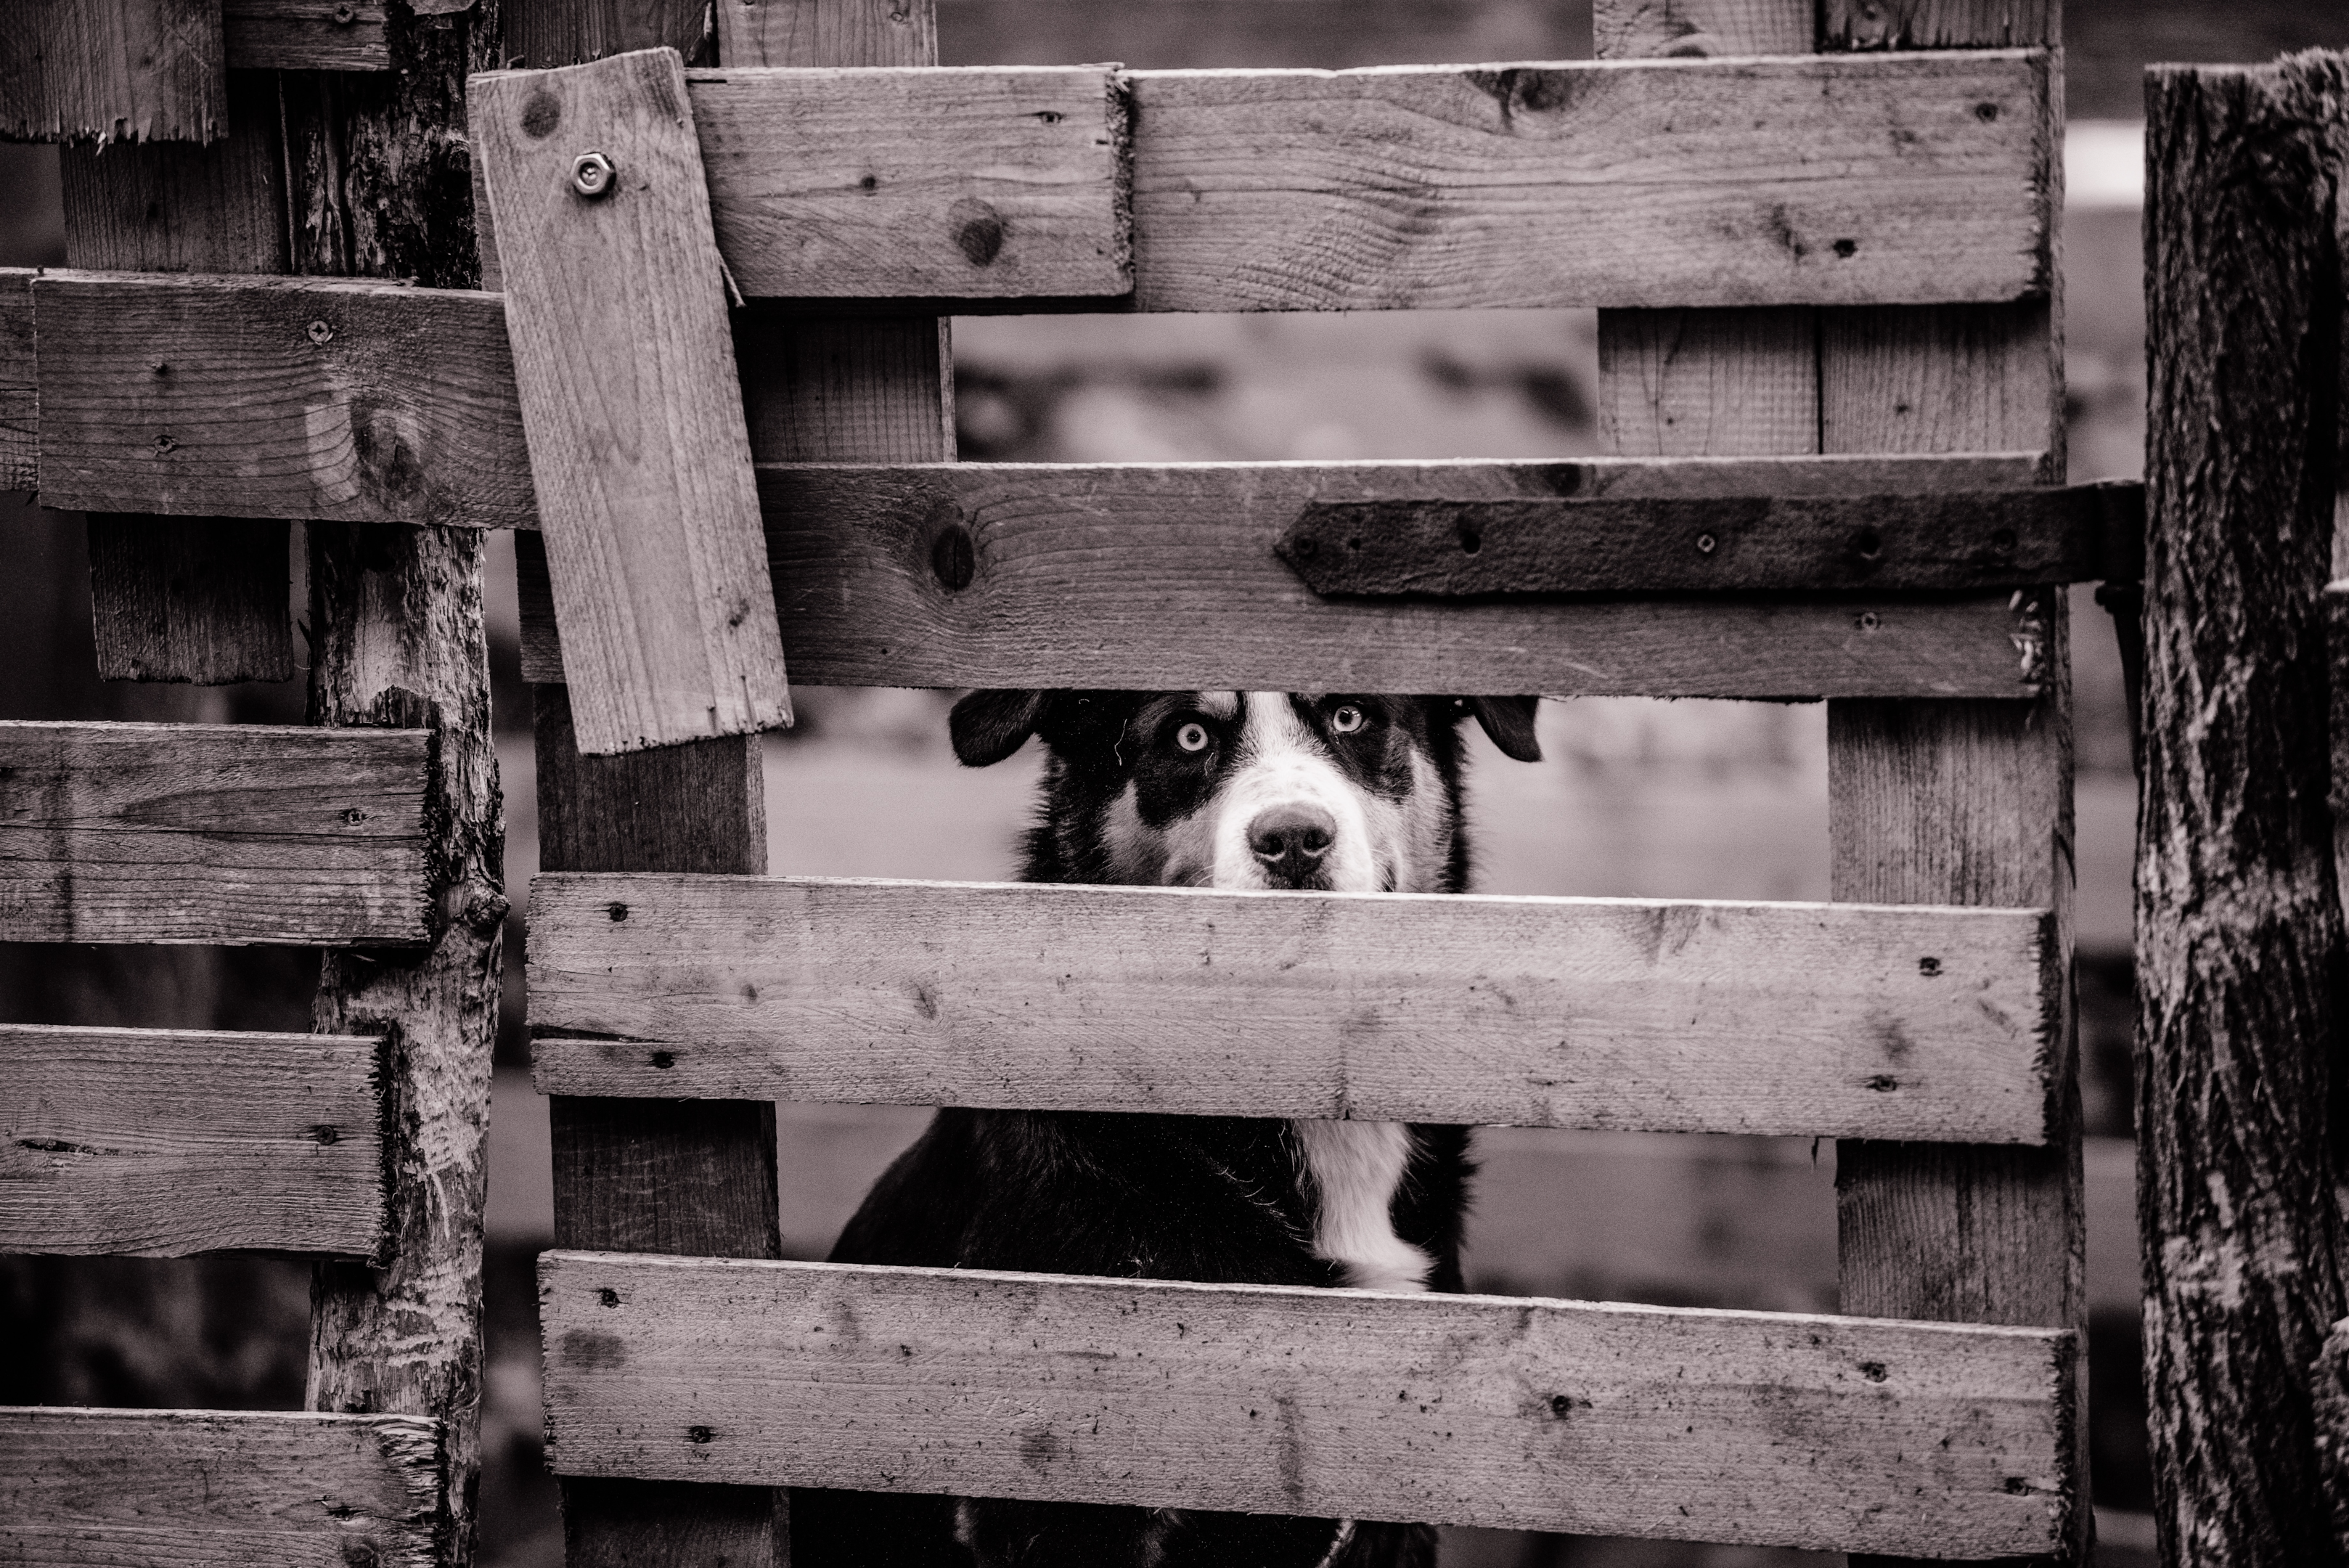 A responsible pet owner will fence their private property to prevent an animal attack.